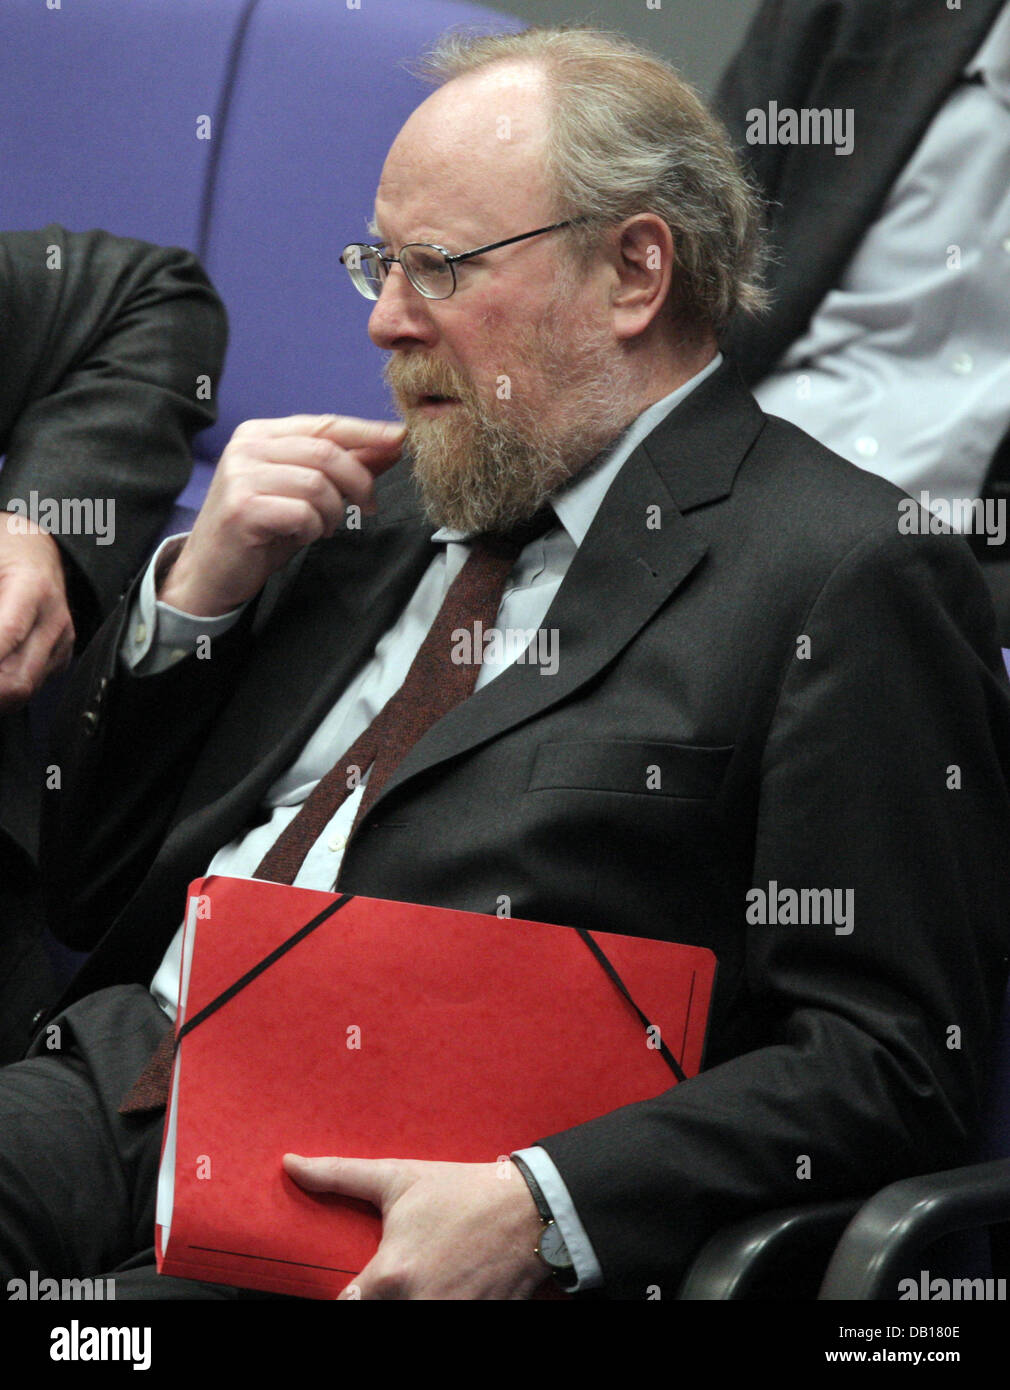 The vice President of the German Bundestag, Wolfgang Thierse (SPD) follows the debate in Berlin, Germany, 15 November 2007. The Bundestag is to vote on the further deployment of Bundeswehr soldiers within Operation Enduring Freedom (OEF). Thierse was harshly critisized due to a statement on former German Chancellor Kohl and has now uttered his regrett. He told German press agency ' Stock Photo